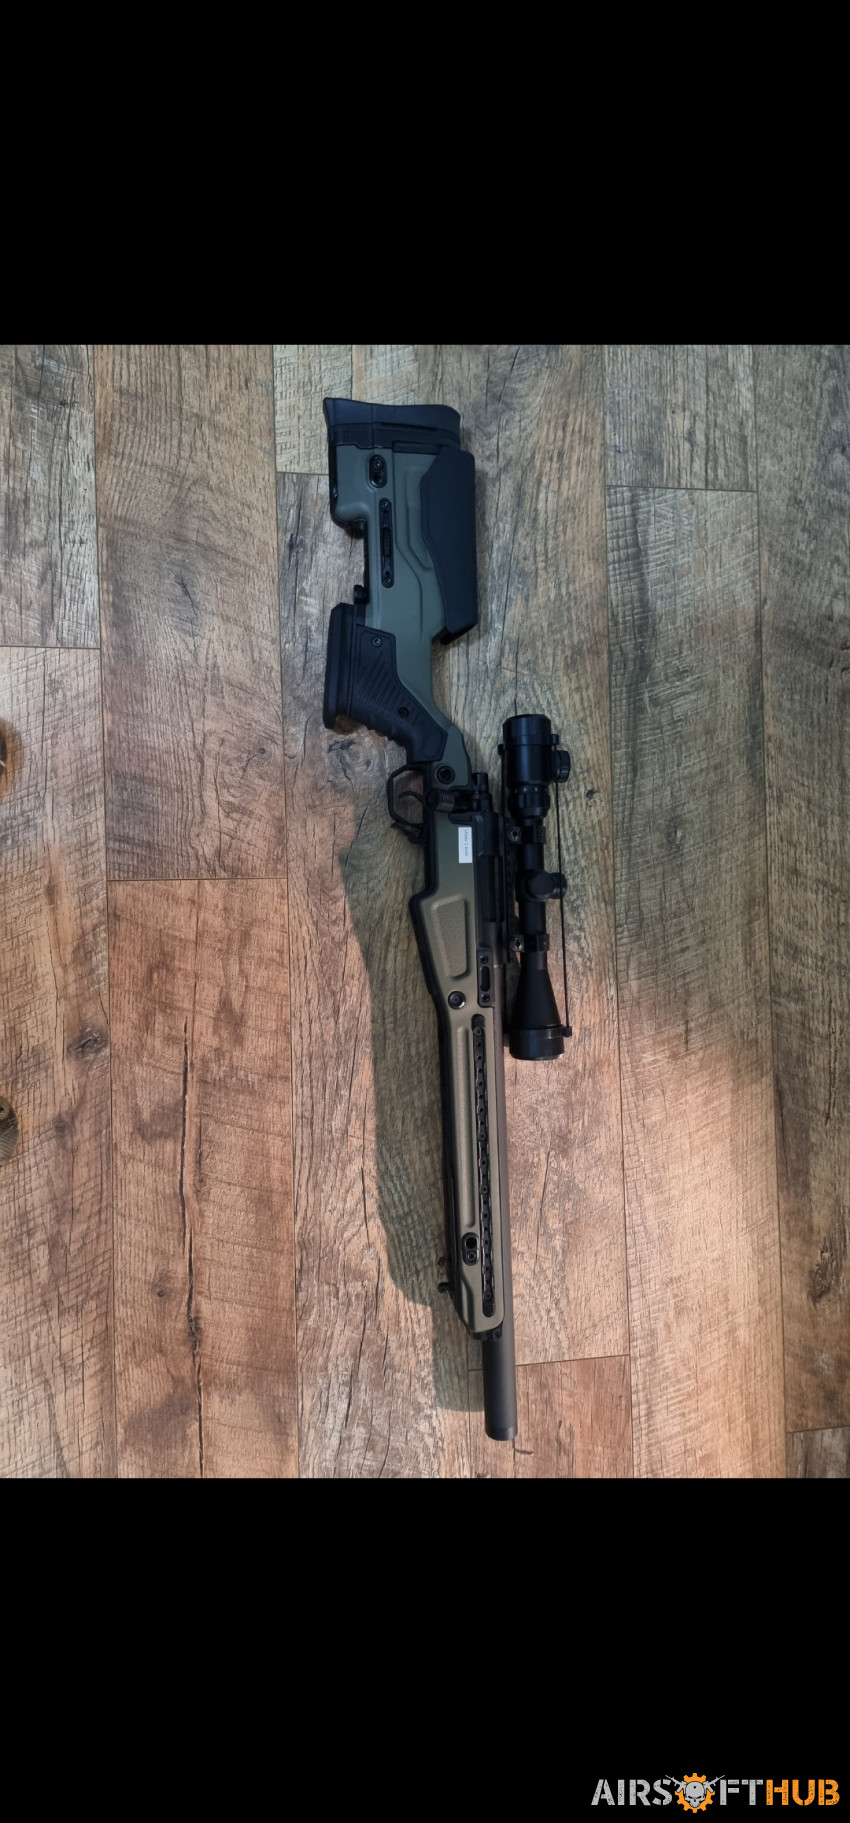 Aac t10 sniper - Used airsoft equipment